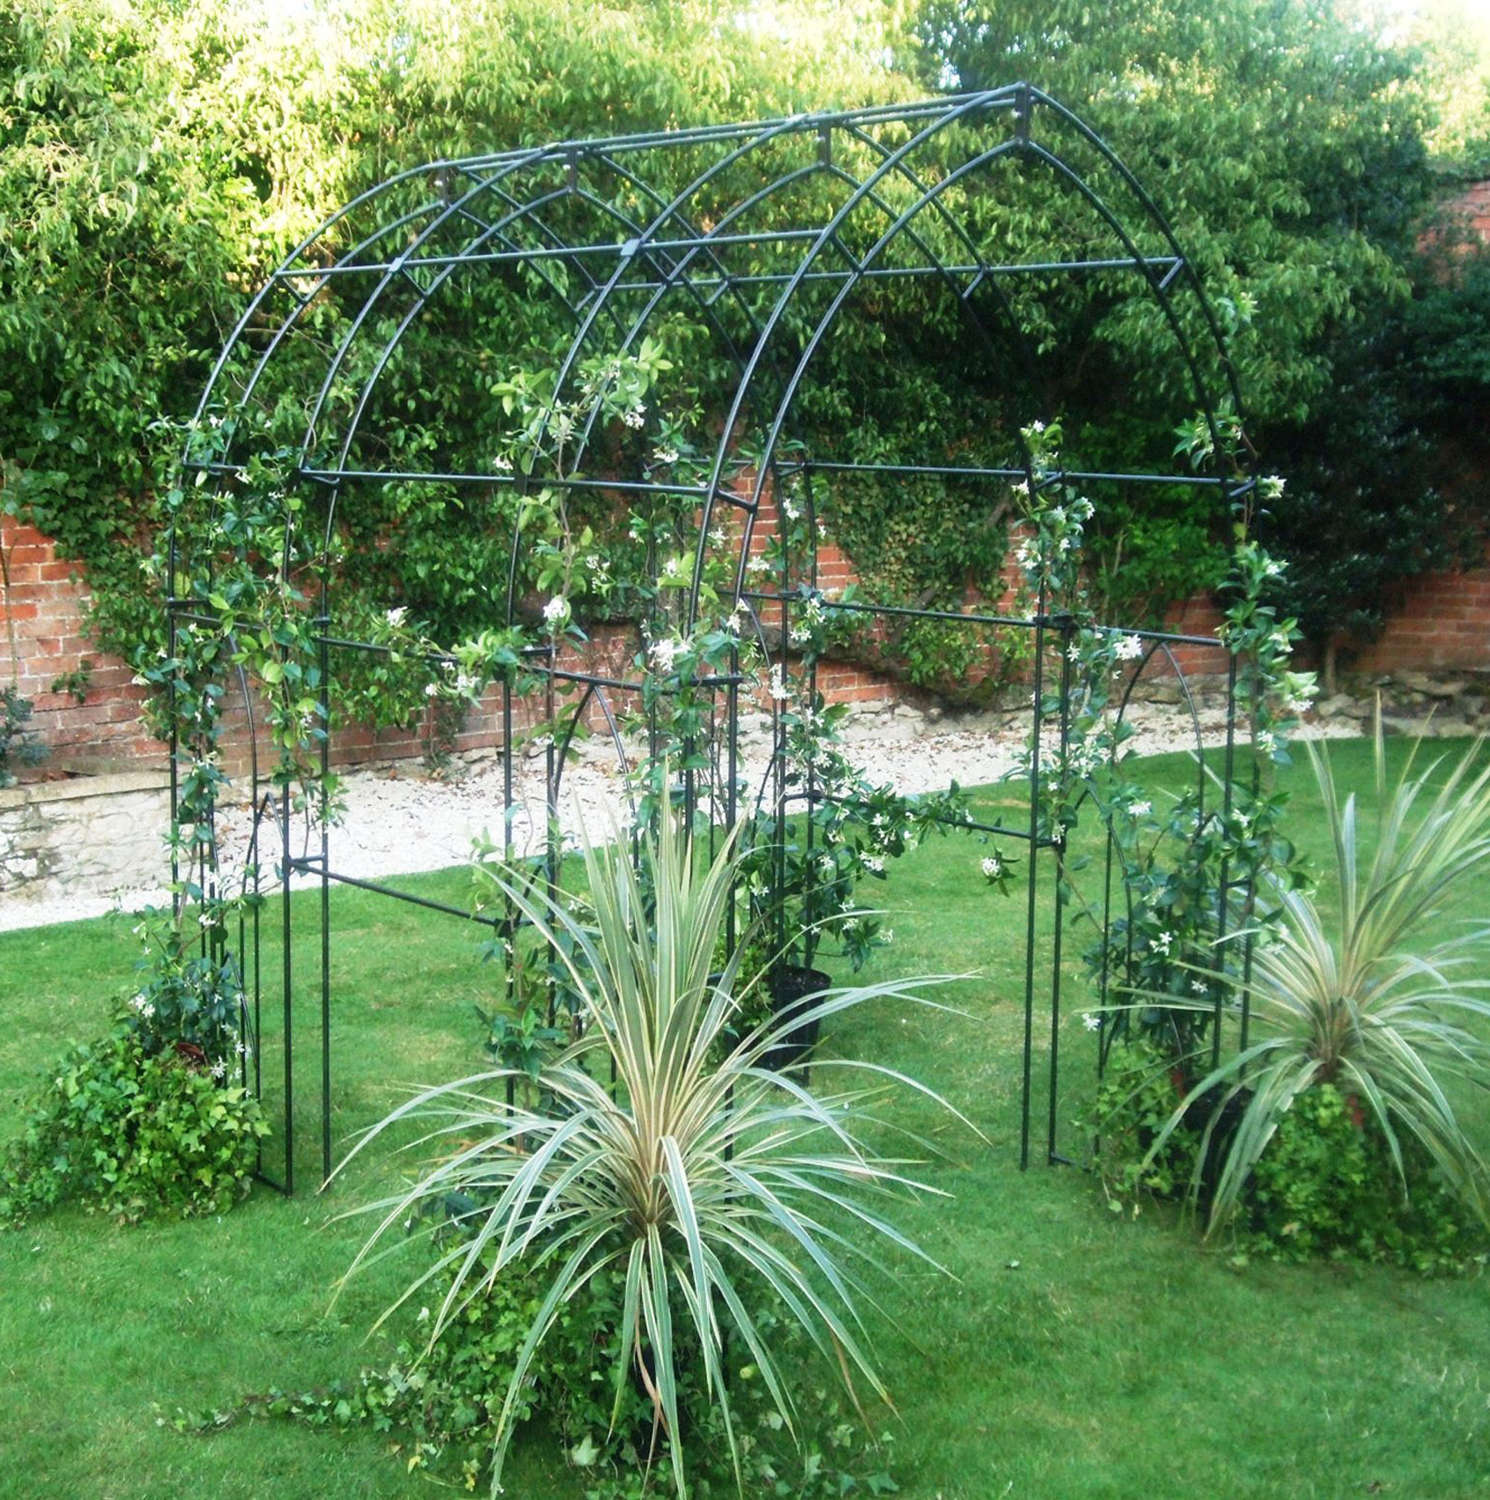 Poppyforge Gothic Arch tunnel manufactured in the UK